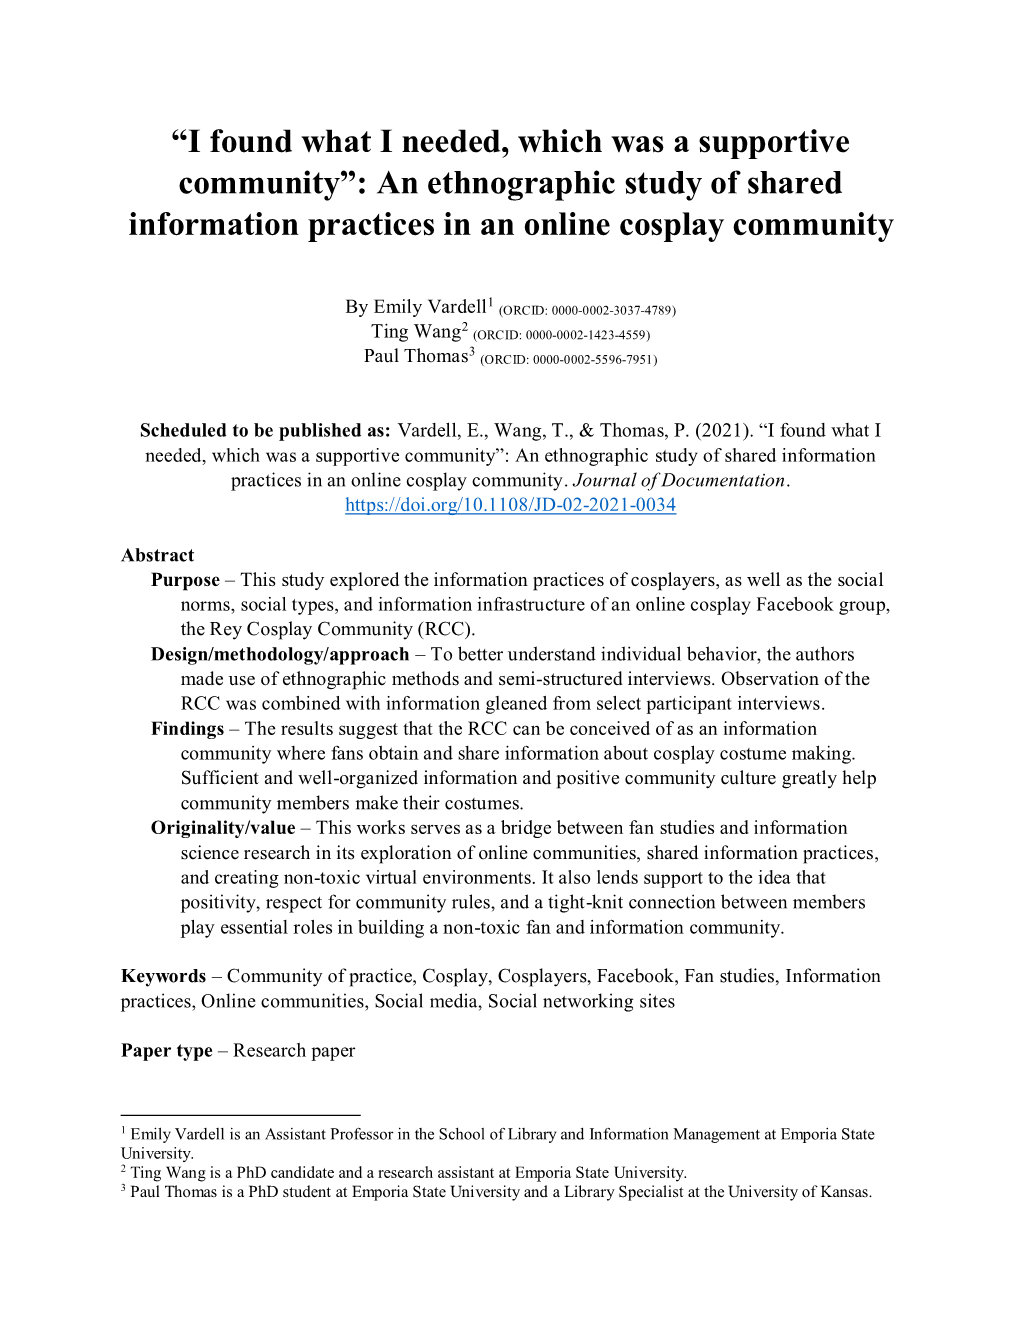 An Ethnographic Study of Shared Information Practices in an Online Cosplay Community